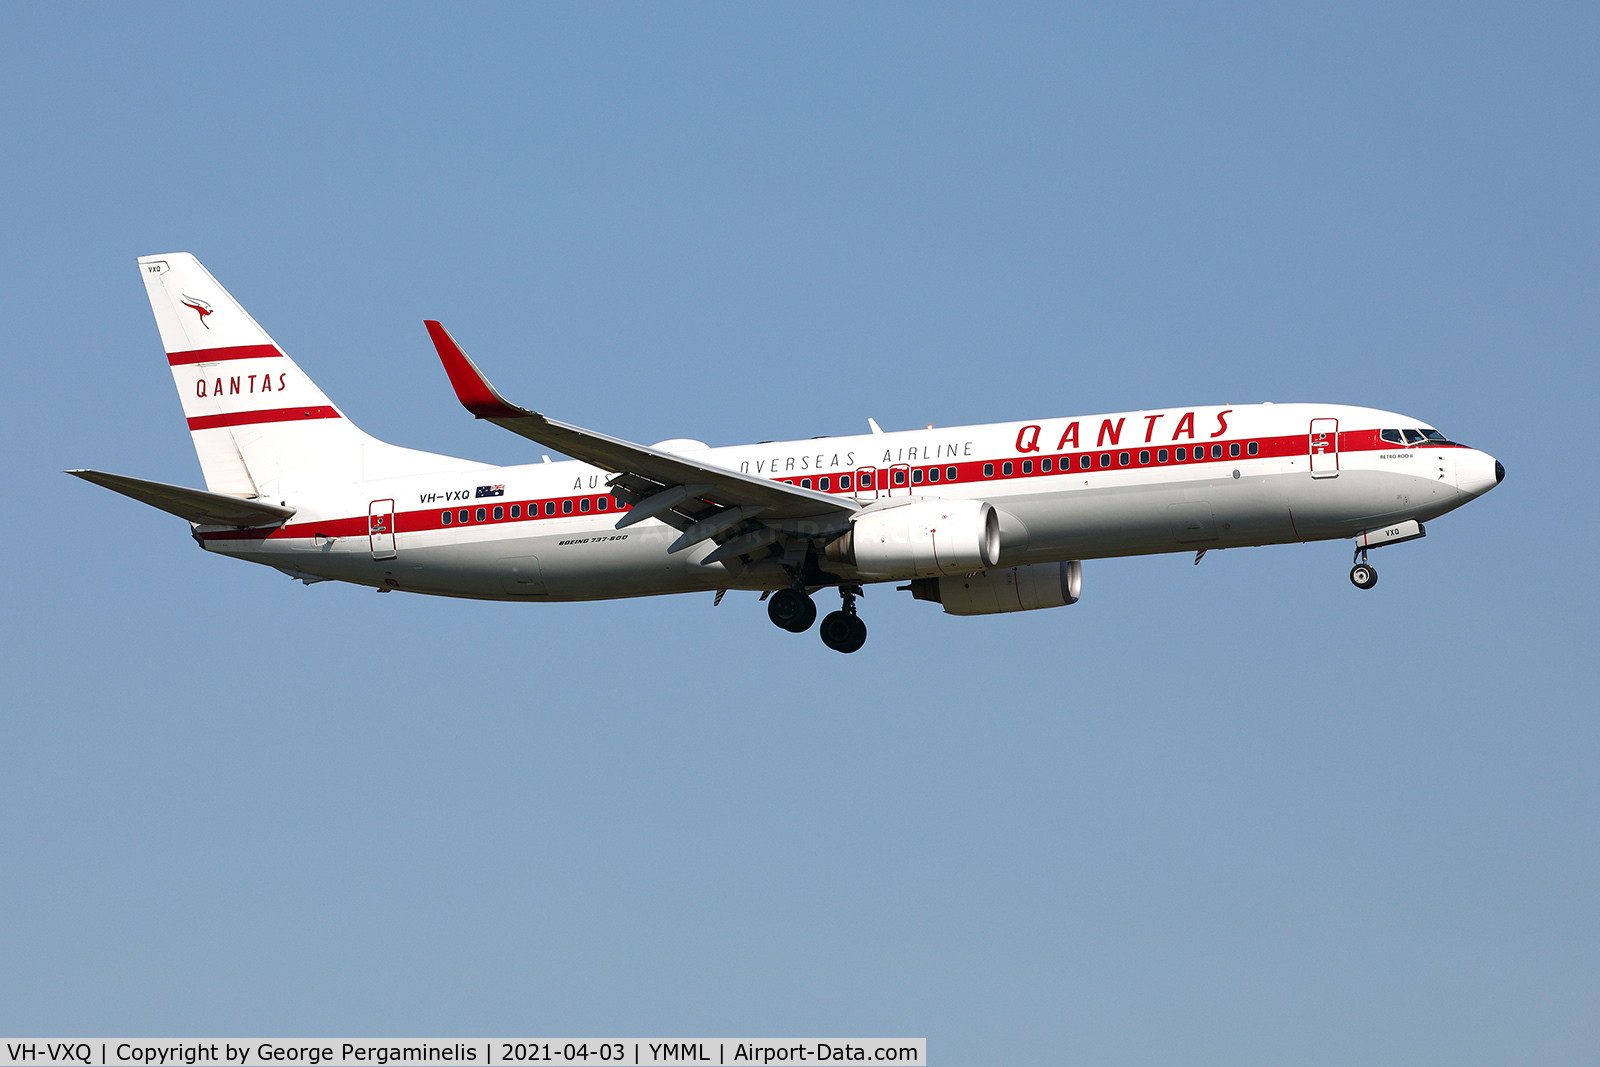 VH-VXQ, 2003 Boeing 737-838 C/N 33723, Retro Roo II on short final for runway 34.